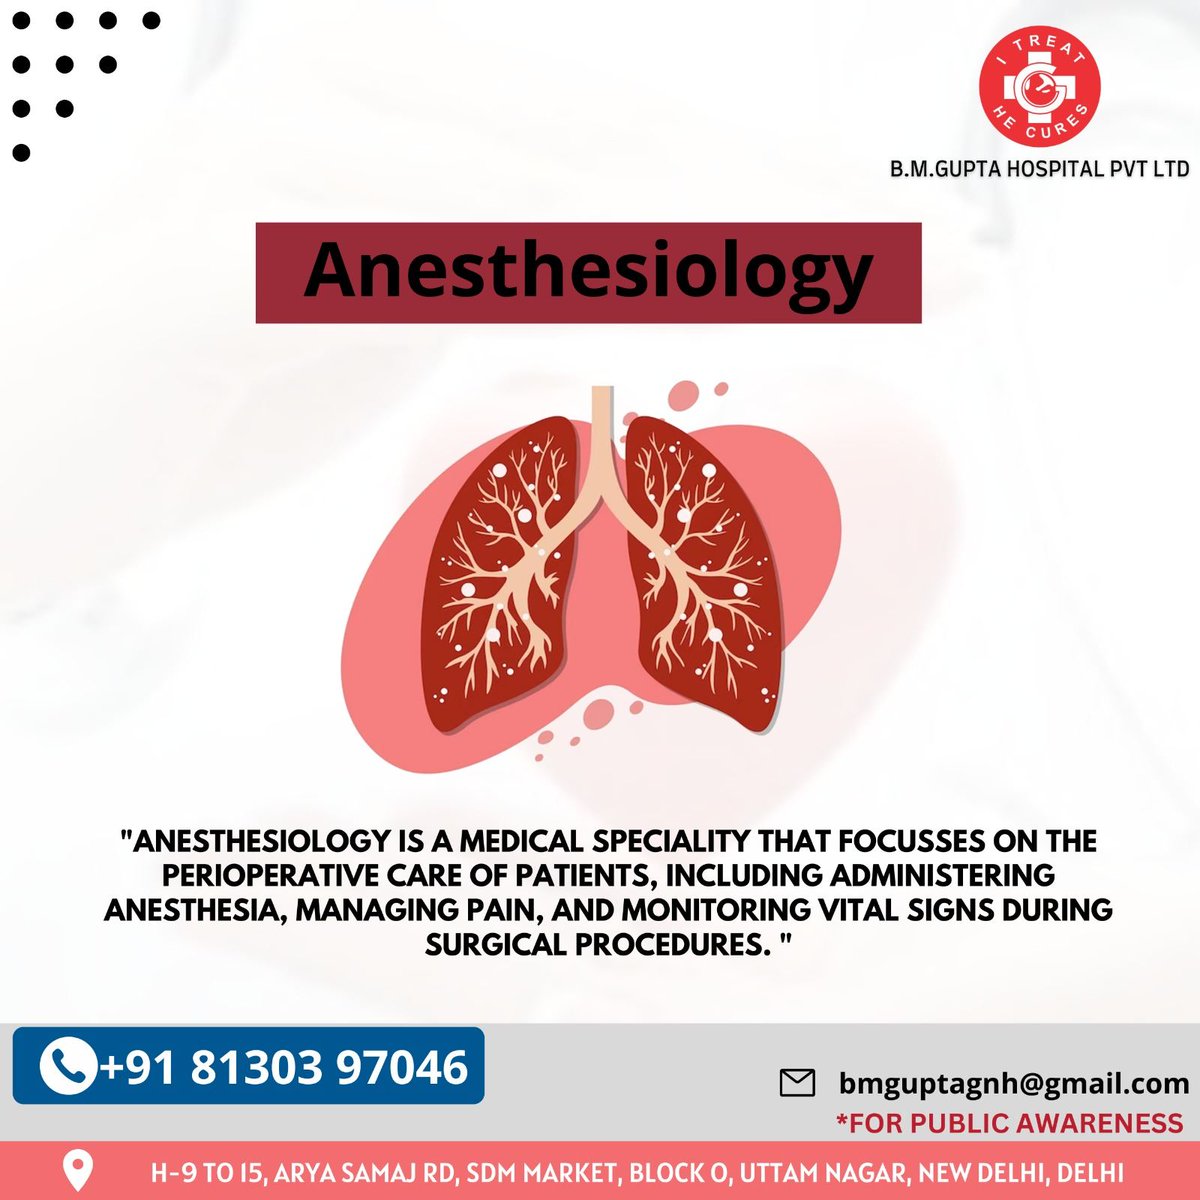 Anesthesiology
For more info 
Call us at  91 81303 97046
Mail us: bmguptagnh@gmail.com

#BMGH #BMGuptaHospital #health #healthcare #IBD #Anesthesiology #Anesthesia #Anesthetic #MedicalSpecialty #SurgicalCare #PainManagement #OperatingRoom #PatientSafety